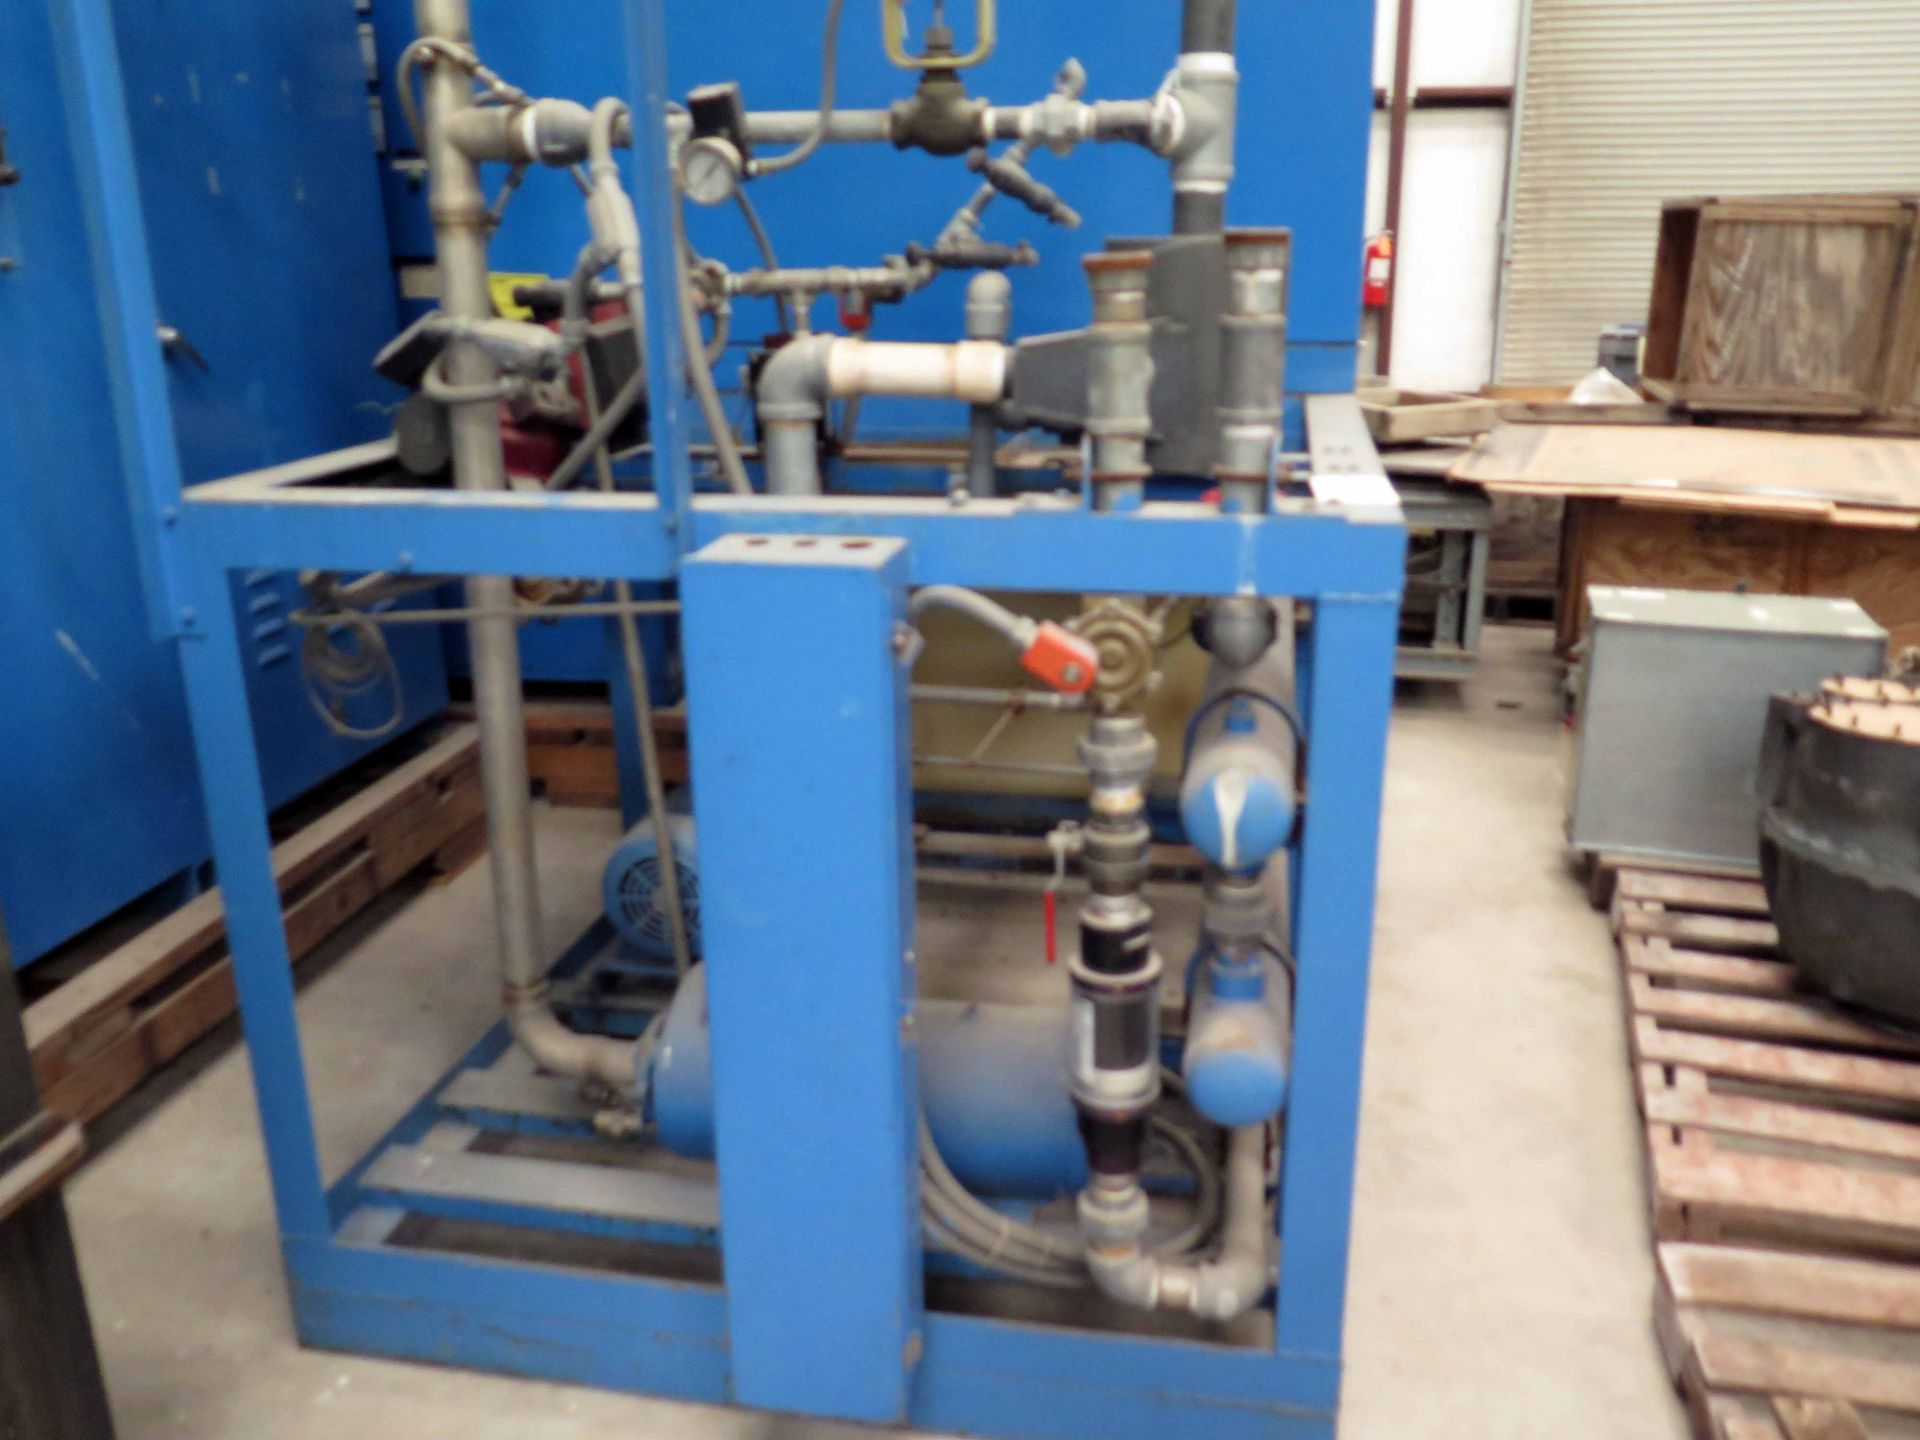 FLUORIDE ION CLEANING SYSTEM, TR COATING INC, including (2) 60 KVA & (1) 120 KVA pwr. supplies, - Image 26 of 26